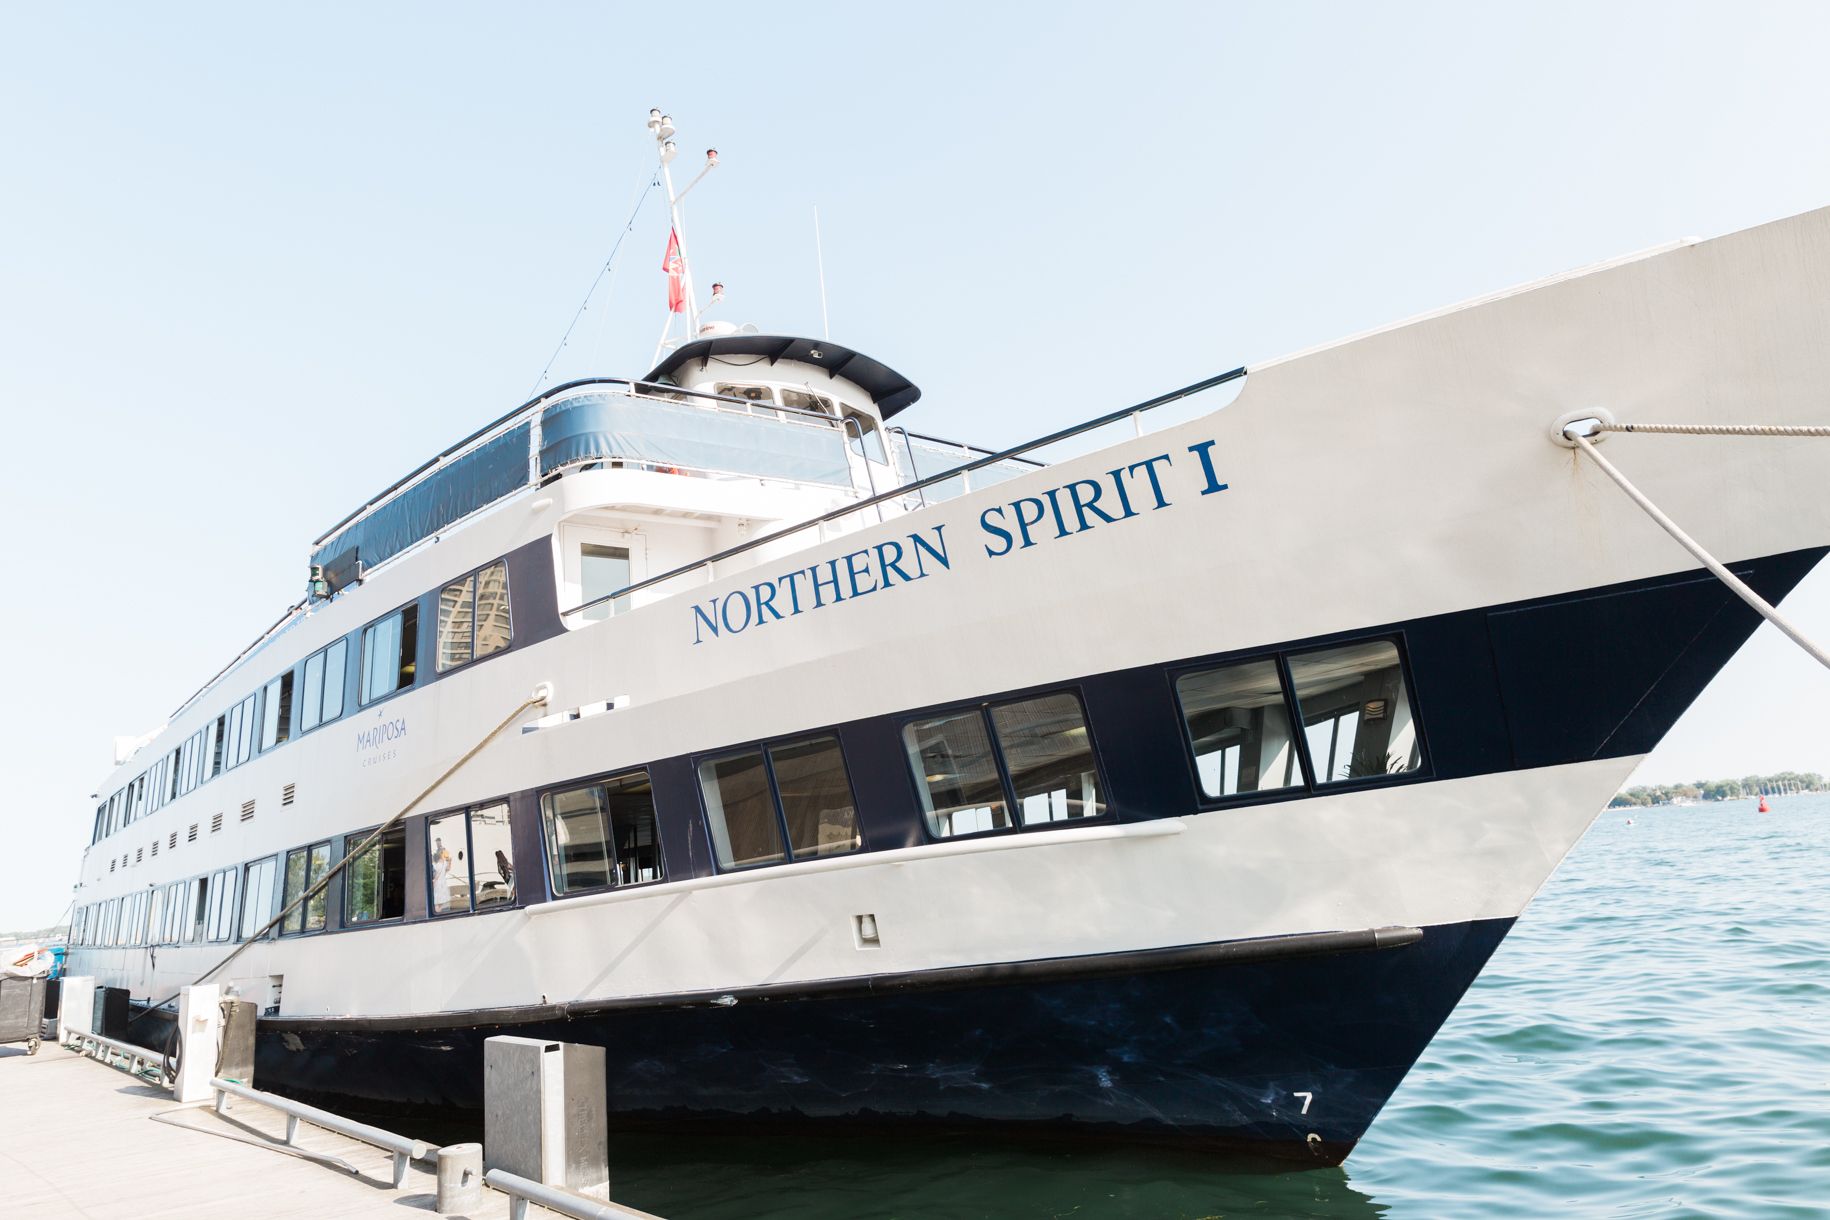 Northern Spirit yacht moored to dock in Toronto